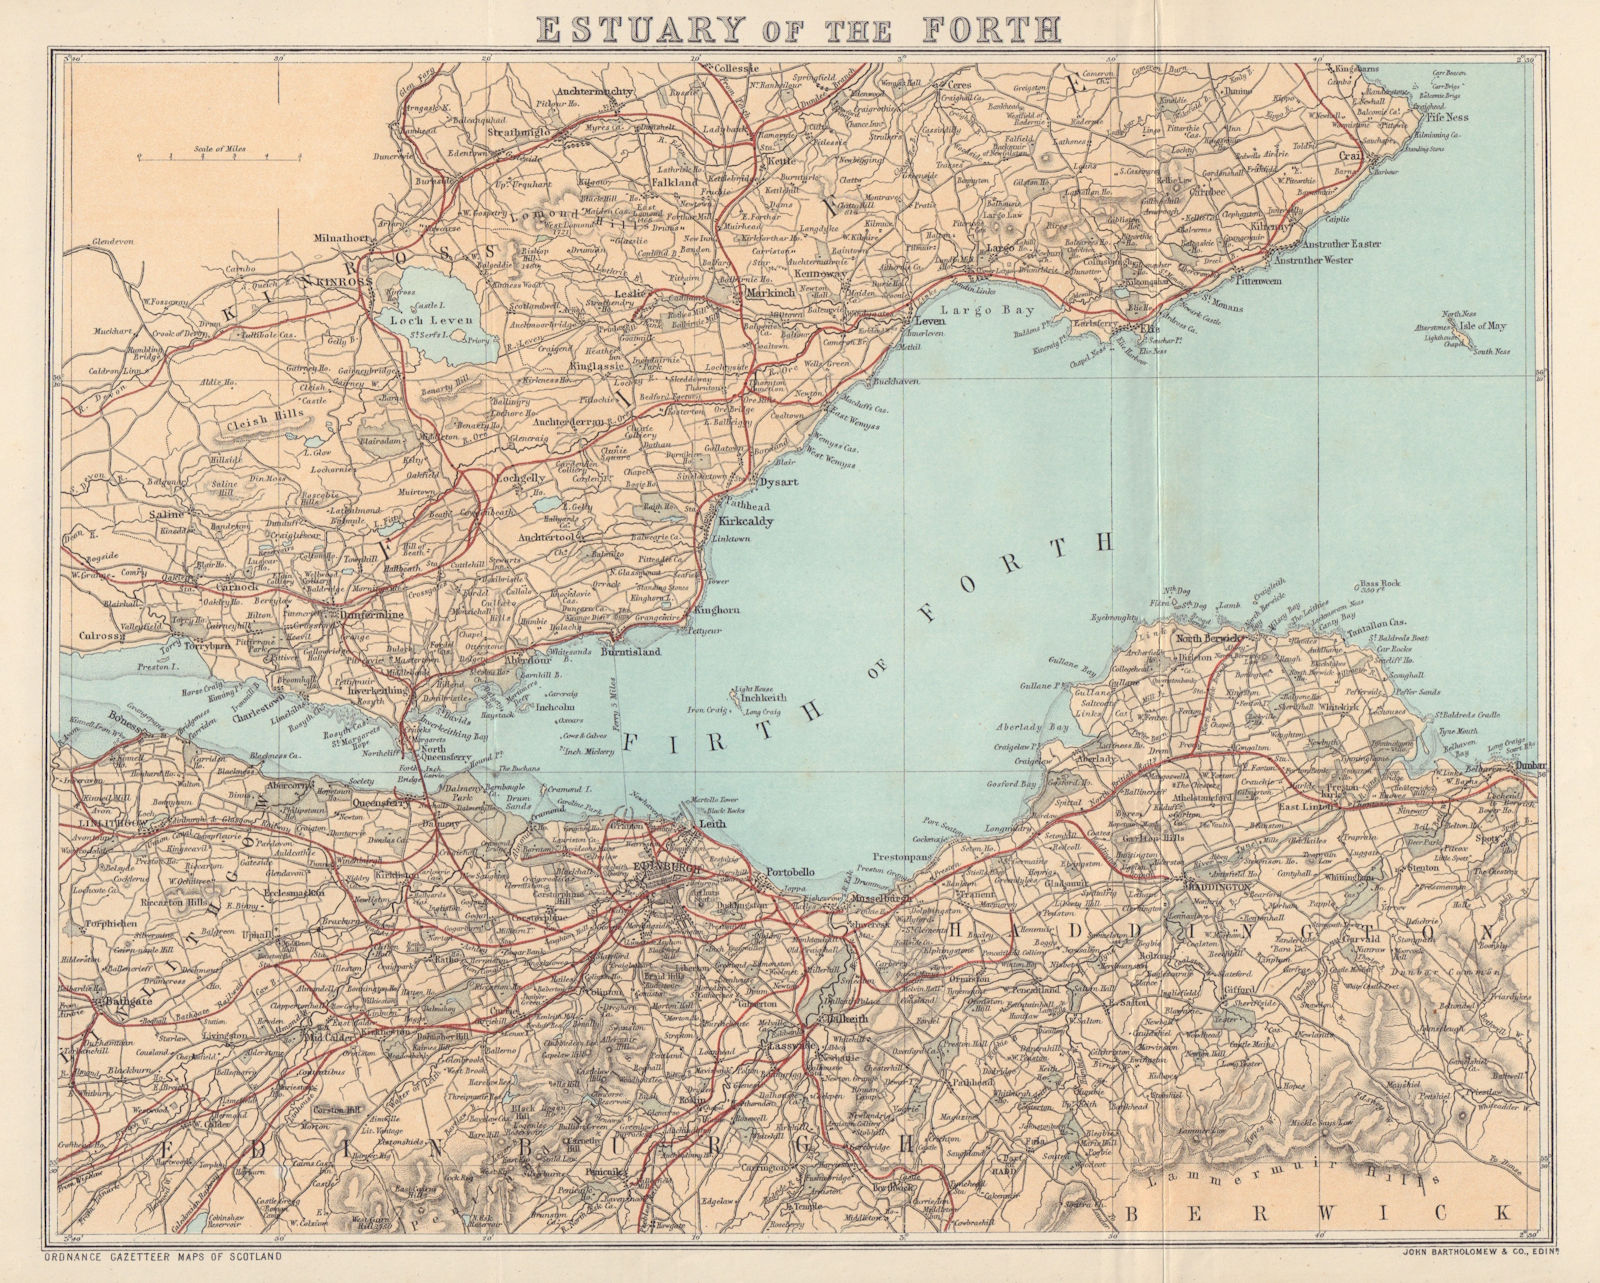 FIRTH OF FORTH. "Estuary of The Forth". Scotland. BARTHOLOMEW 1895 old map